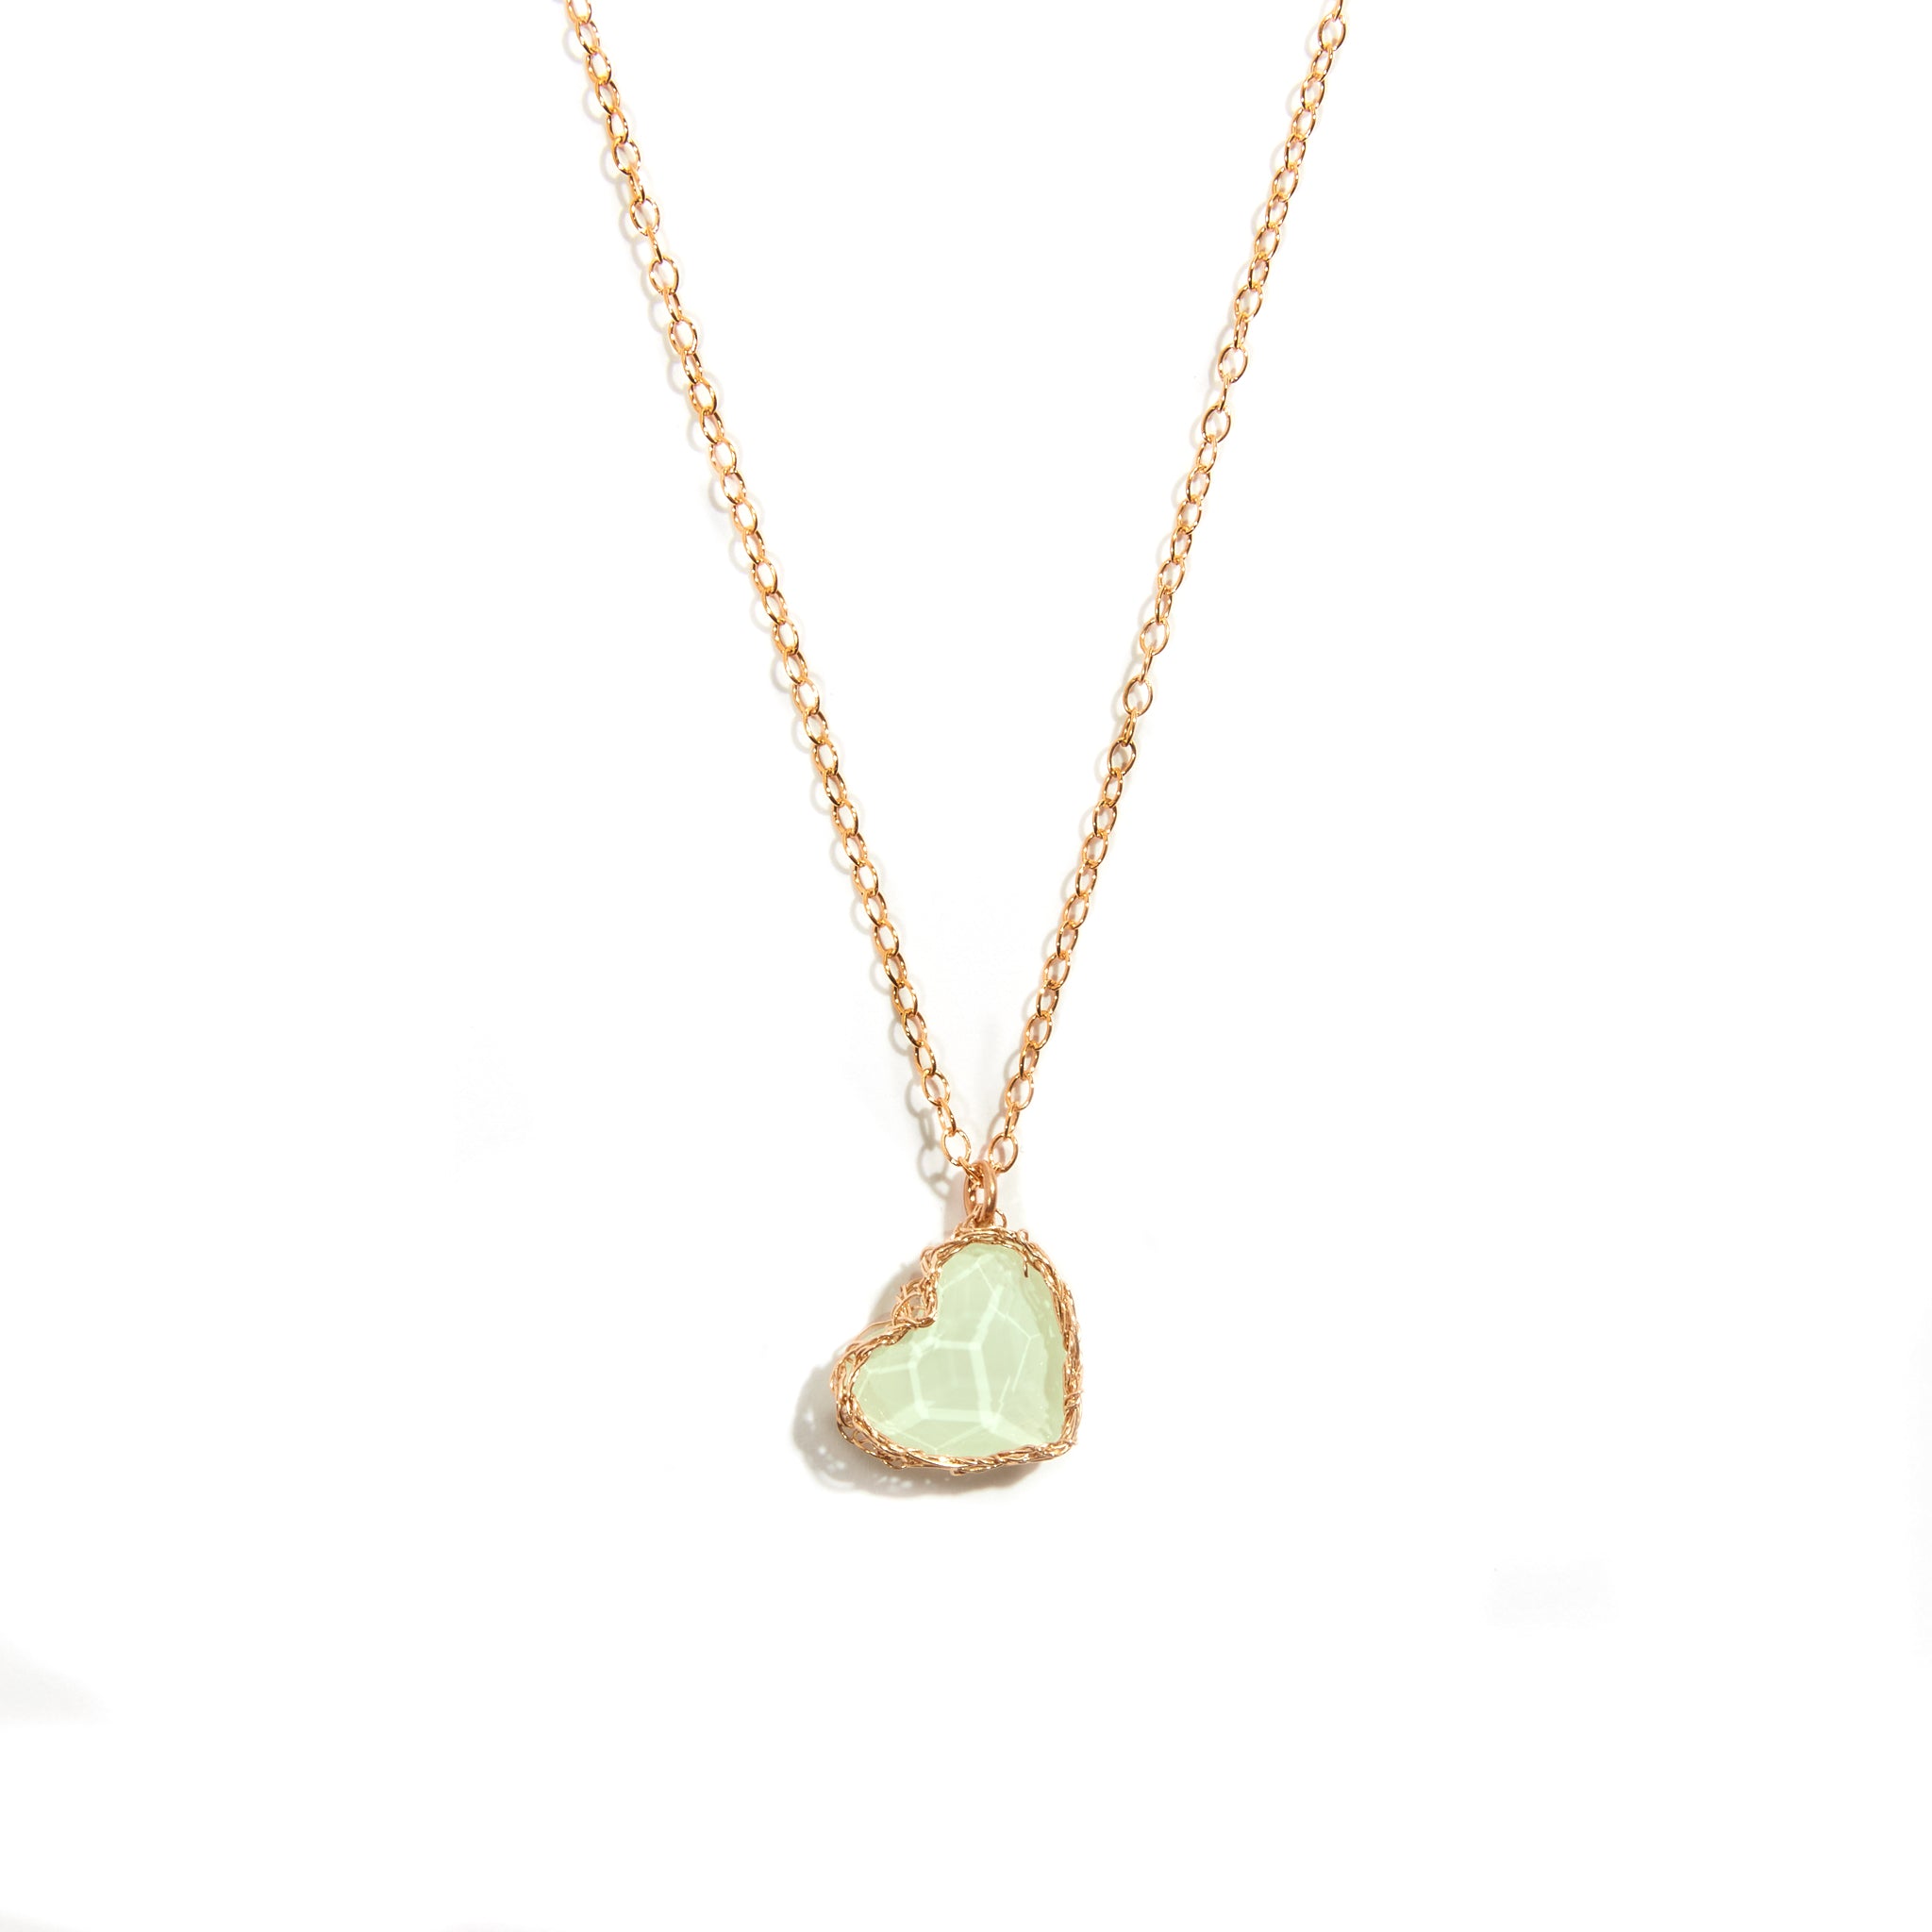 Green Crochet Heart Pendant handcrafted from 14ct Gold Filled material, featuring a charming flat heart design adorned with delicate pink crochet knitting. Add a touch of whimsy to your look with this delightful accessory, perfect for any occasion.